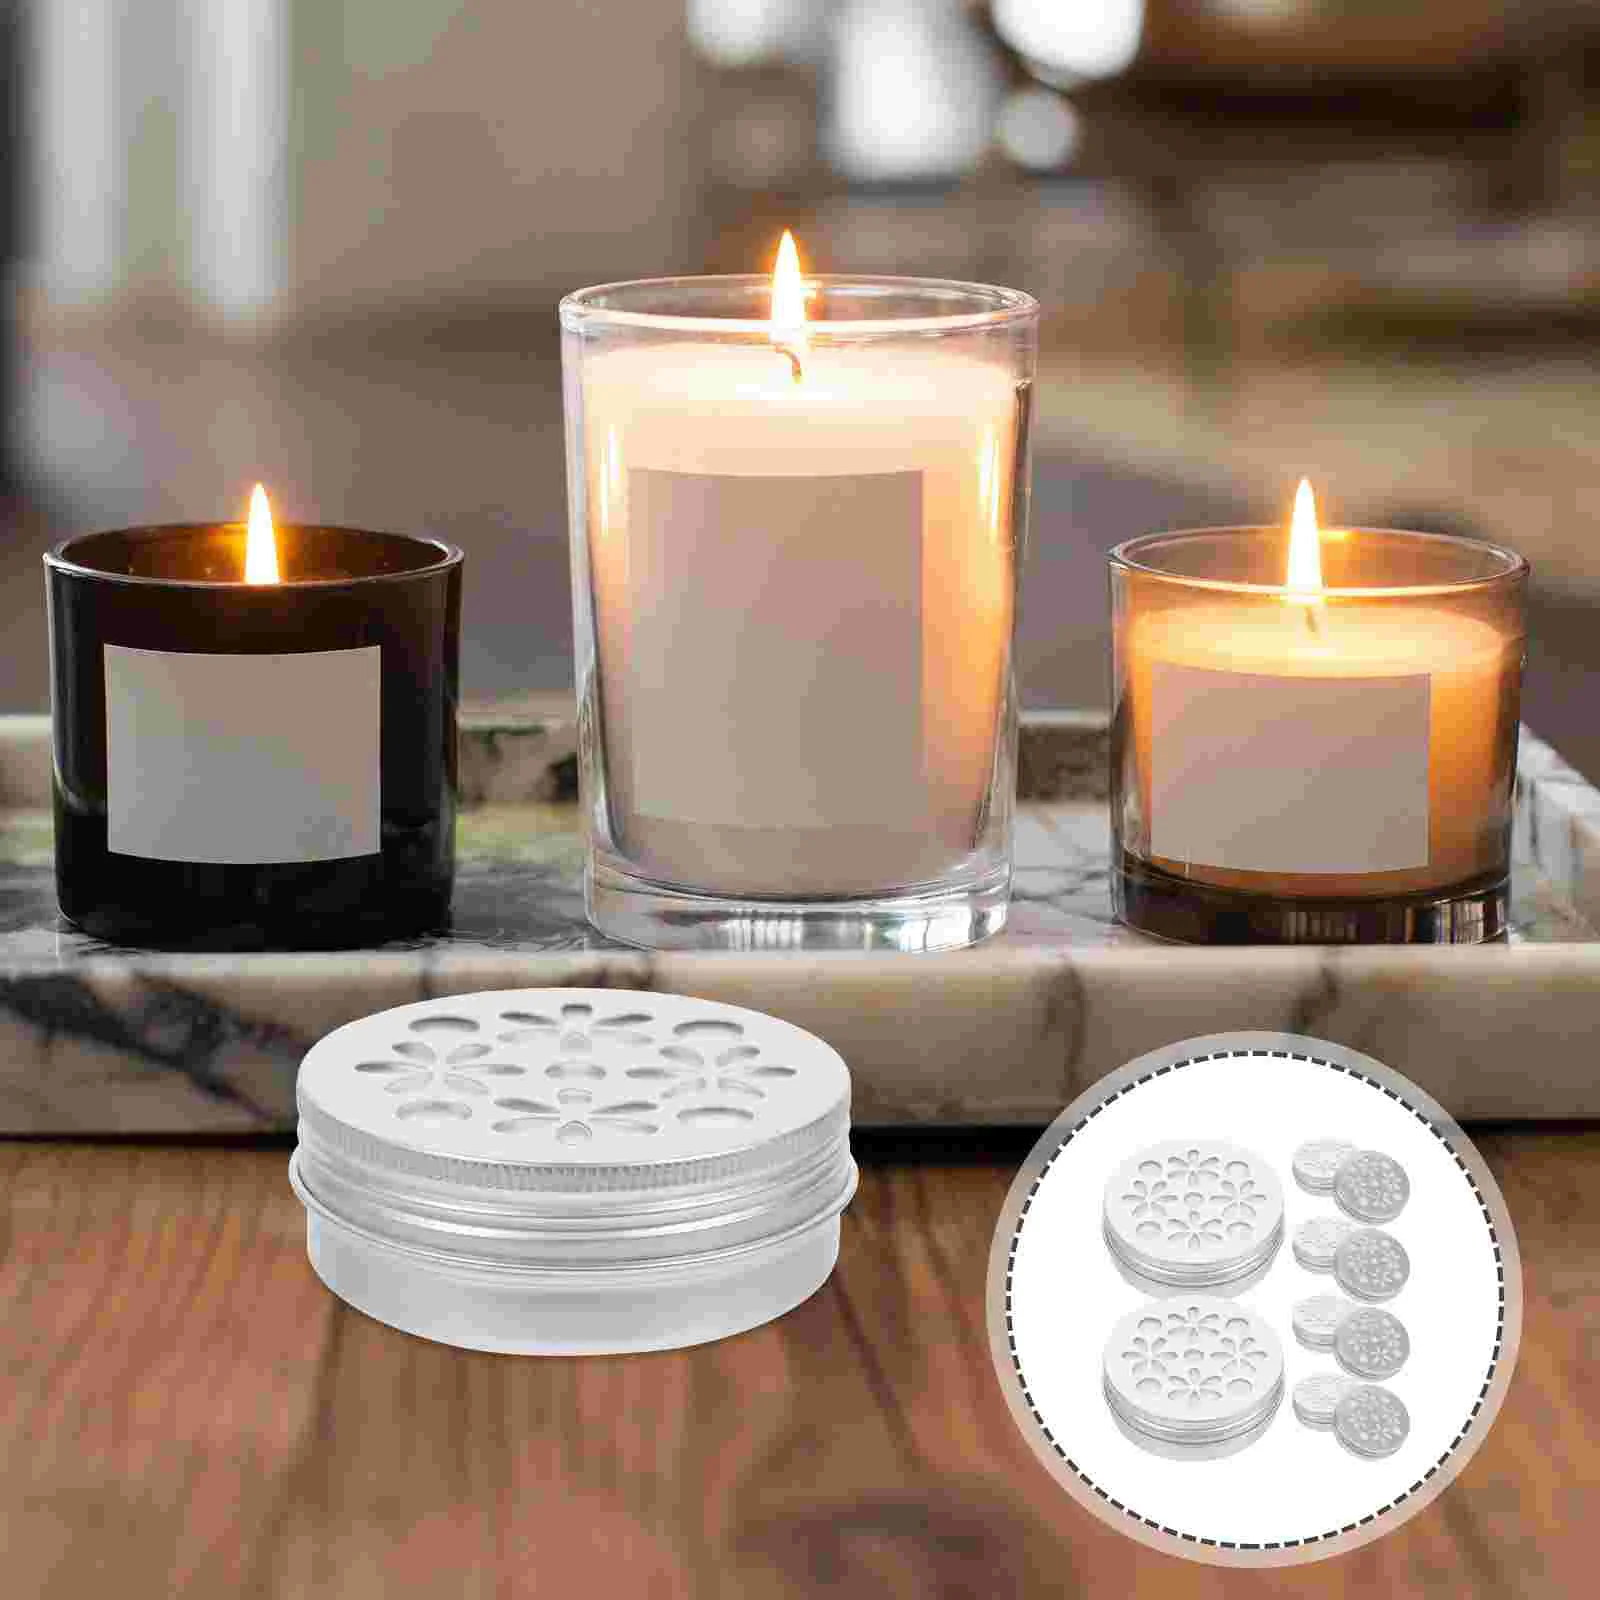 

Sewacc Aluminum Tea Lights Cups 10Pcs 60Ml Metal Tealight Tins Containers Diy Empty Scented Candle Cup Hollow Lids Holiday